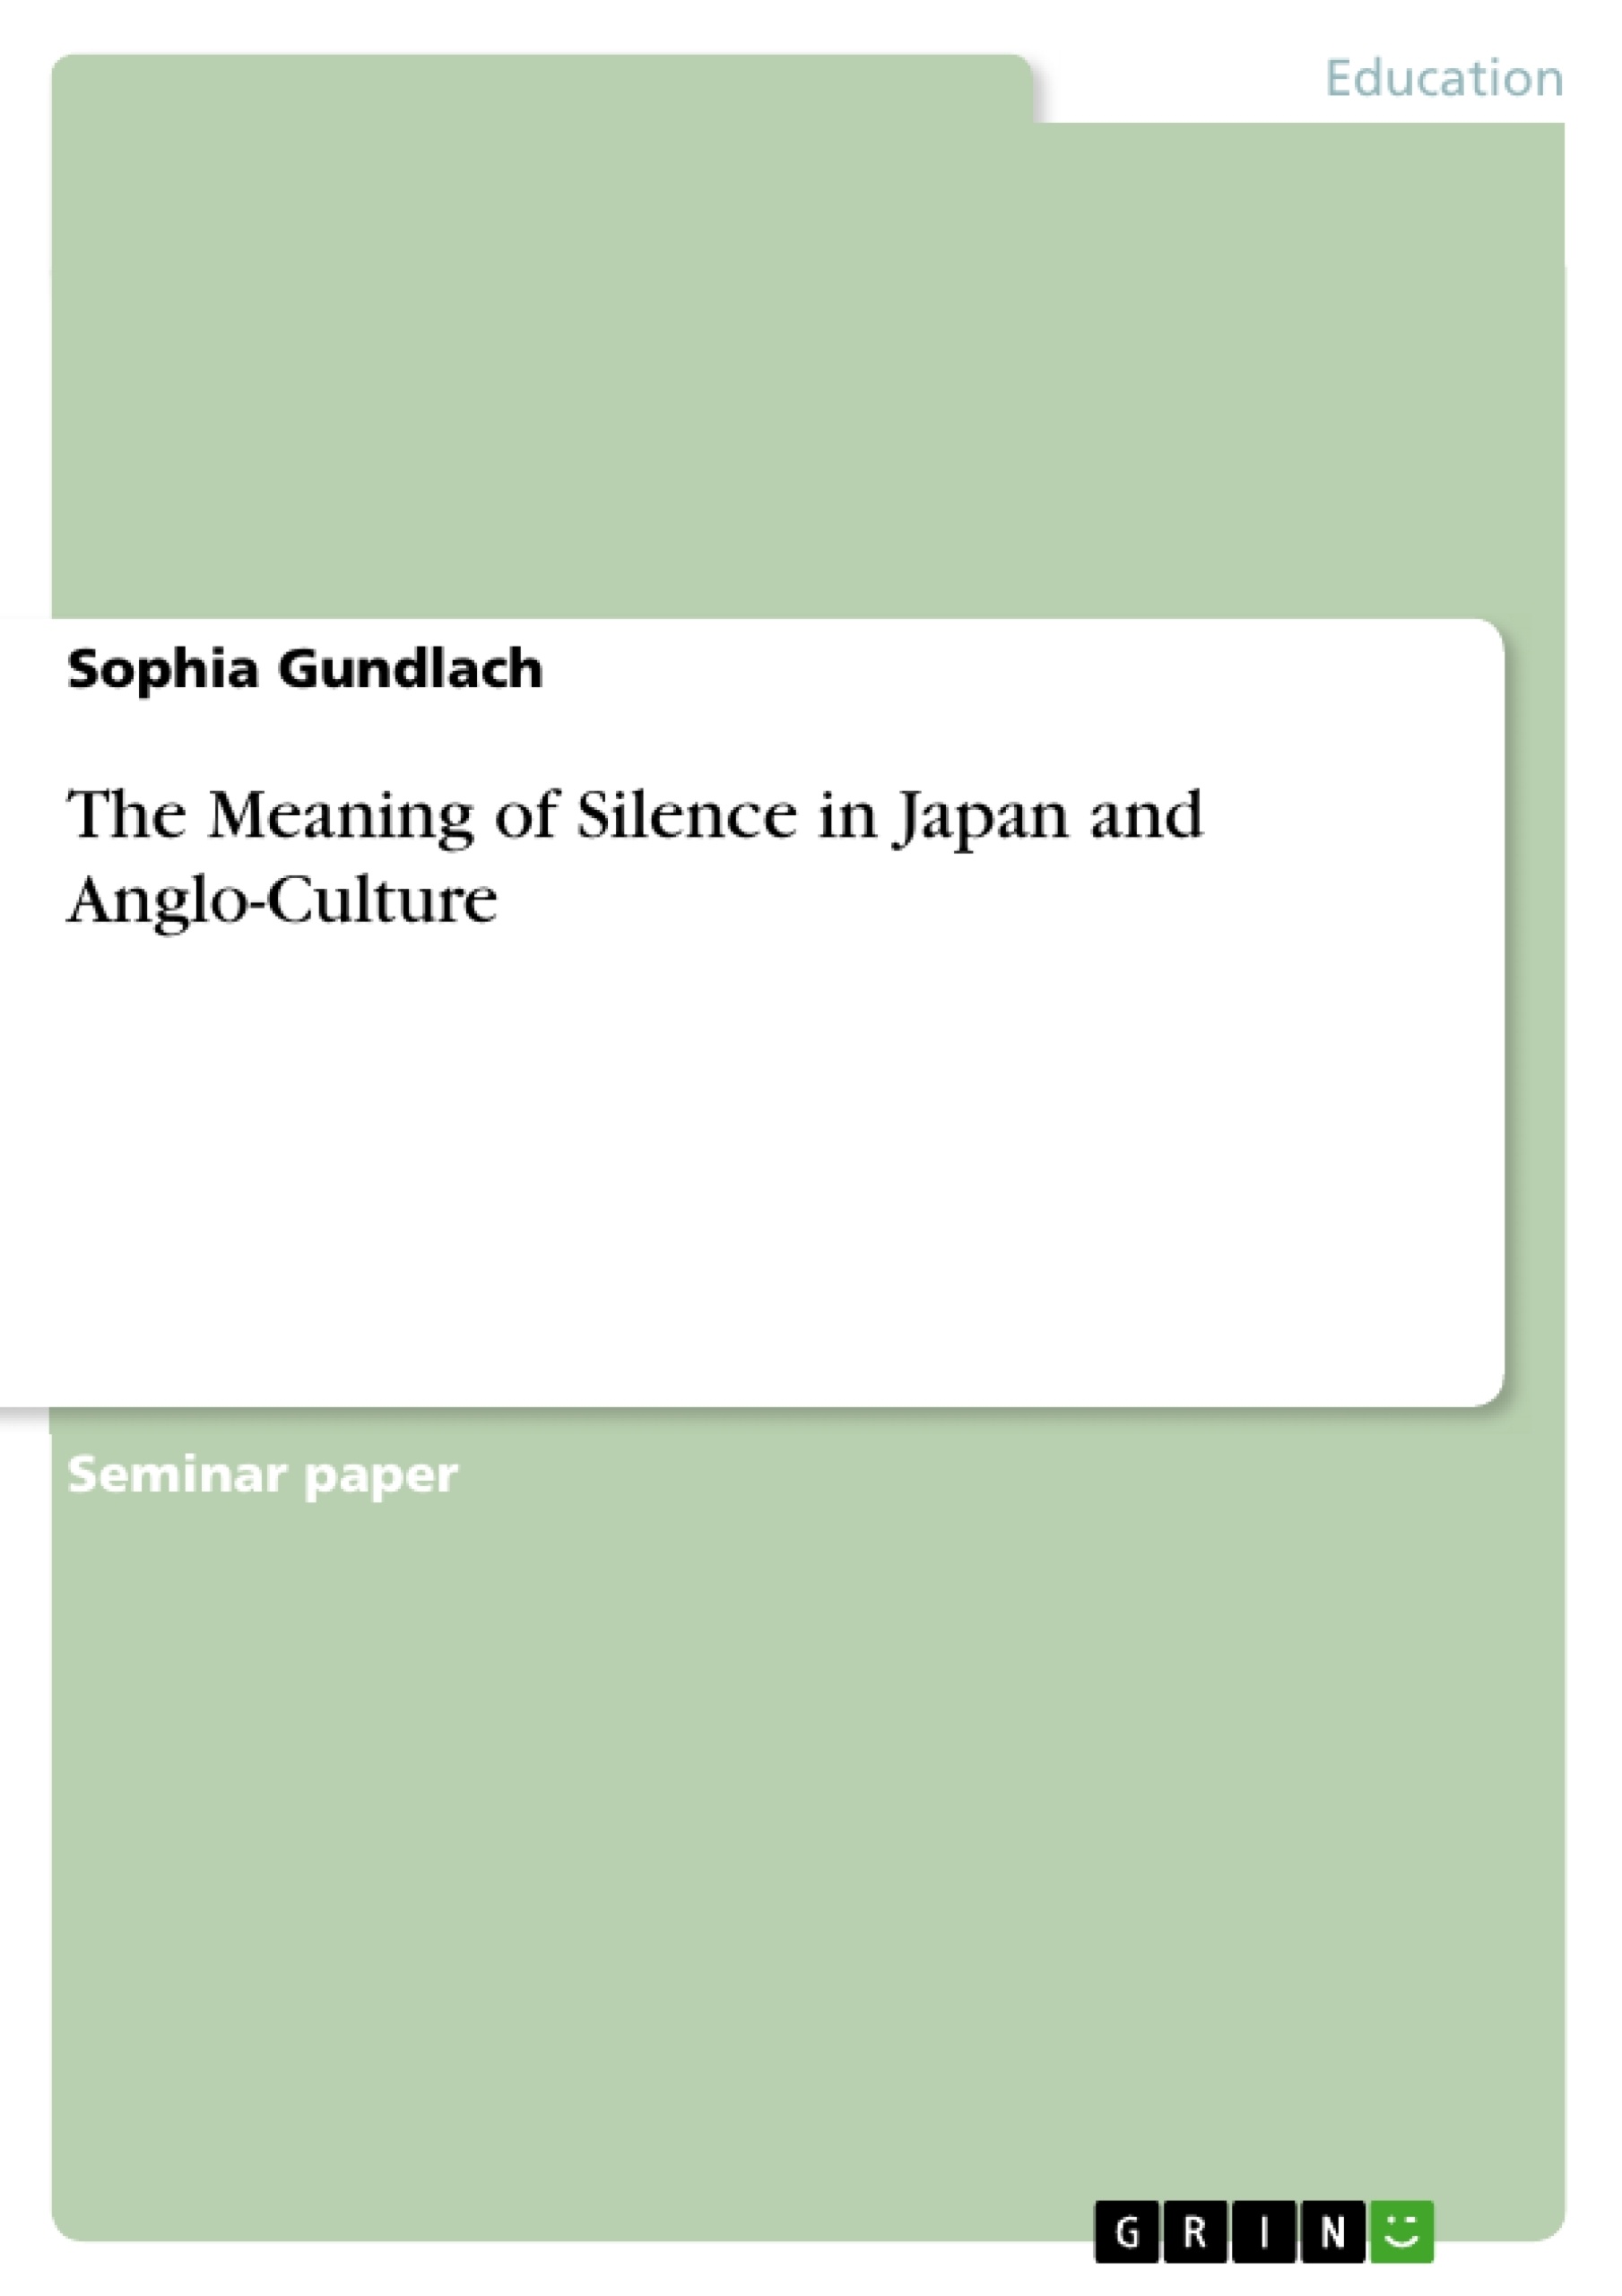 Title: The Meaning of Silence in Japan and Anglo-Culture